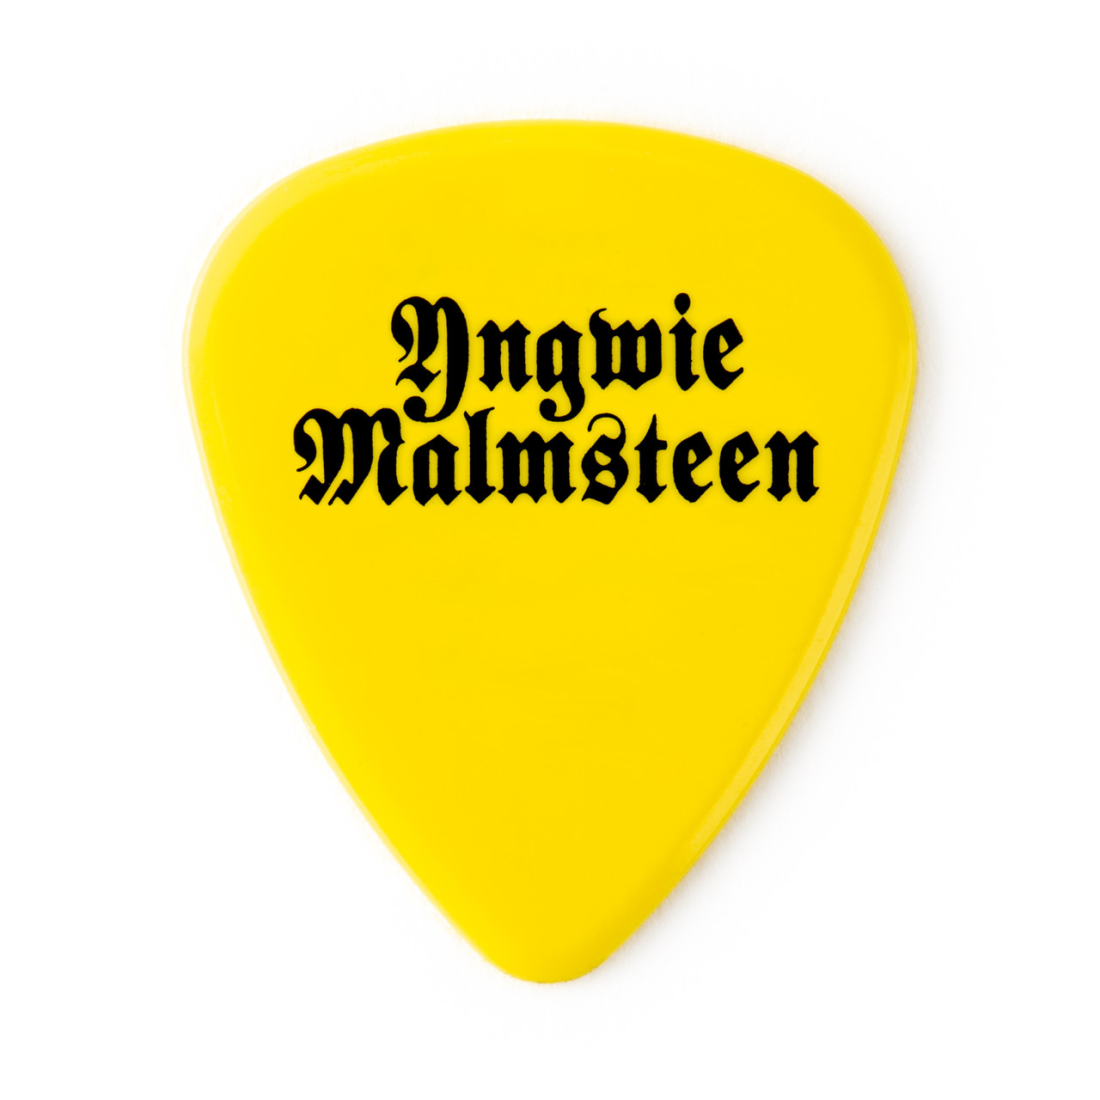 Yngwie Malmsteen Players Pack (6 Pack) - 1.14mm